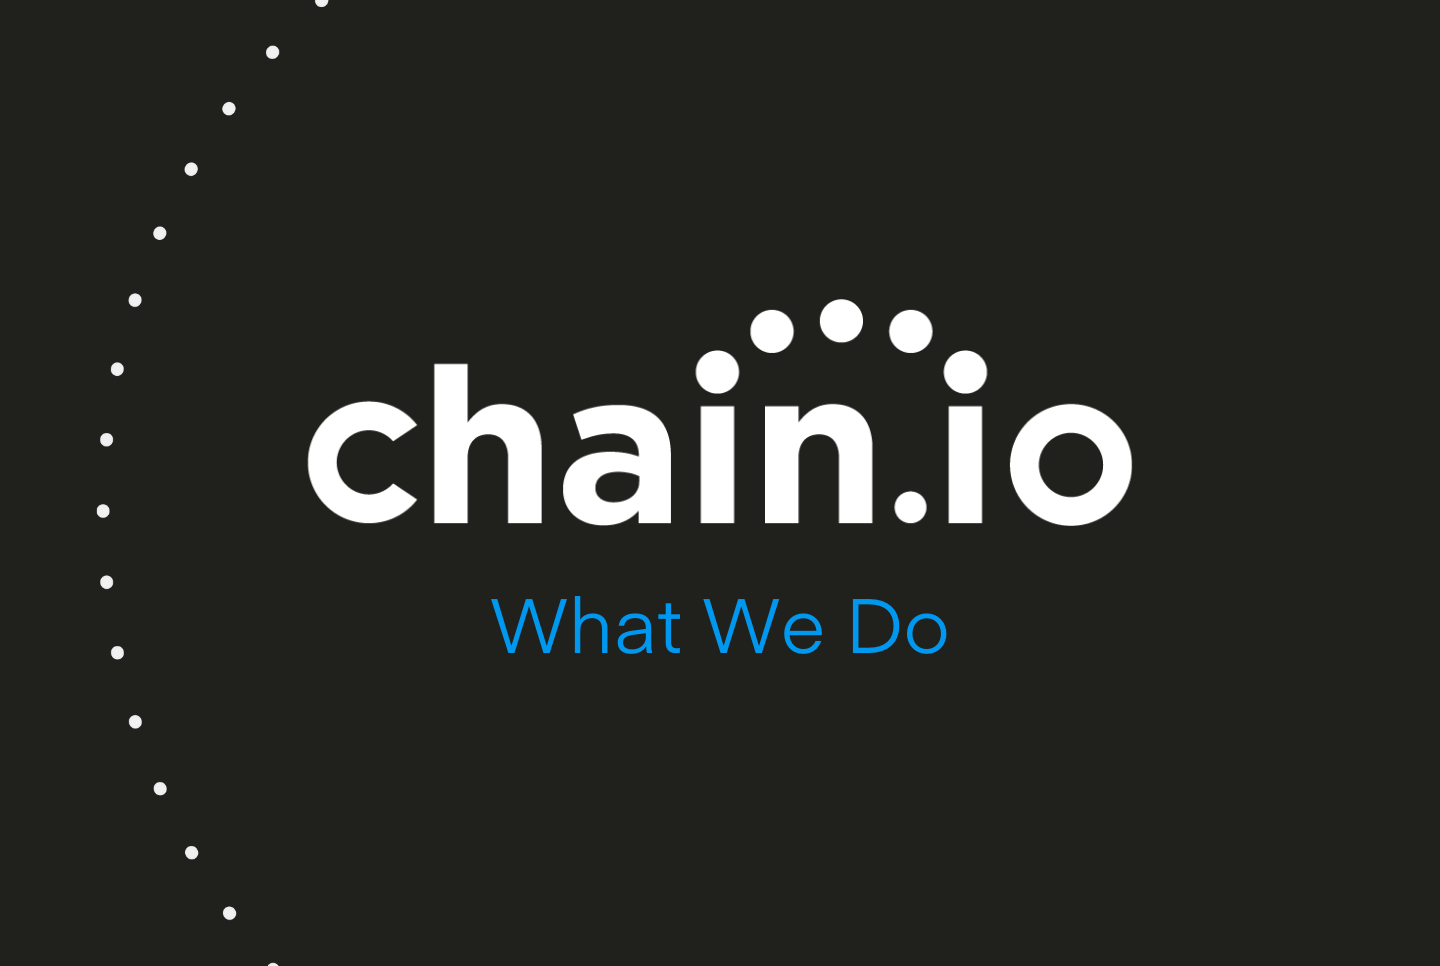 High-level overview of the Chain.io product and capabilities. 